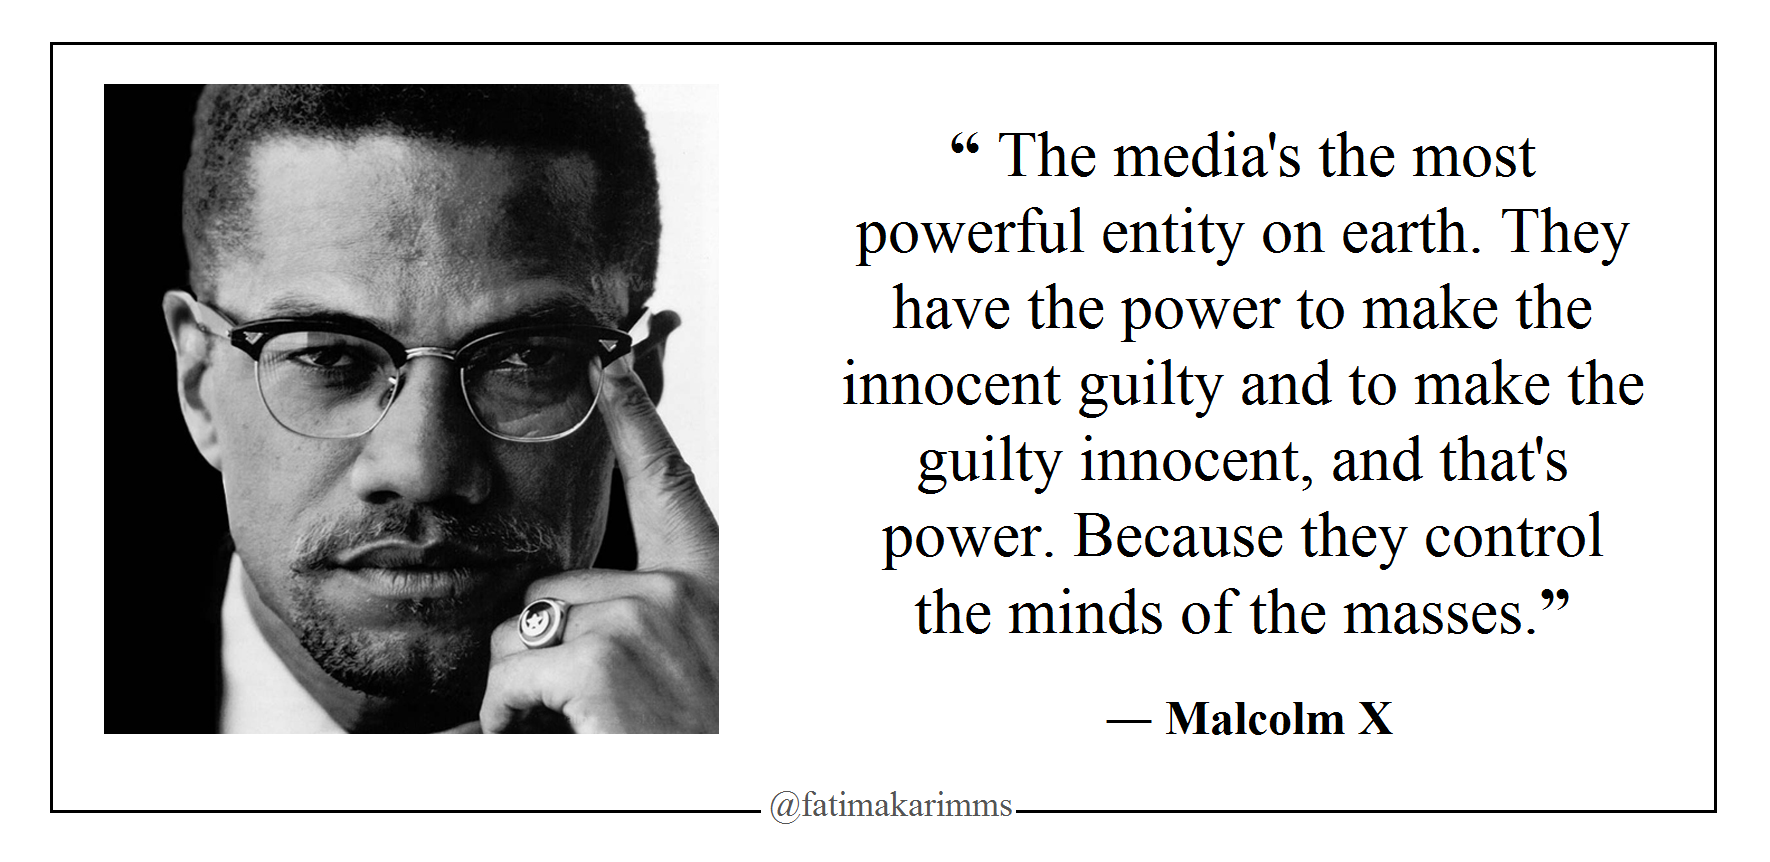 The Media S The Most Powerful Entity On Earth They Have The Power To Make The Innocent Guilty And To Make The Guilty Innocent Malcolm X 1770 862 Oc Quotethee